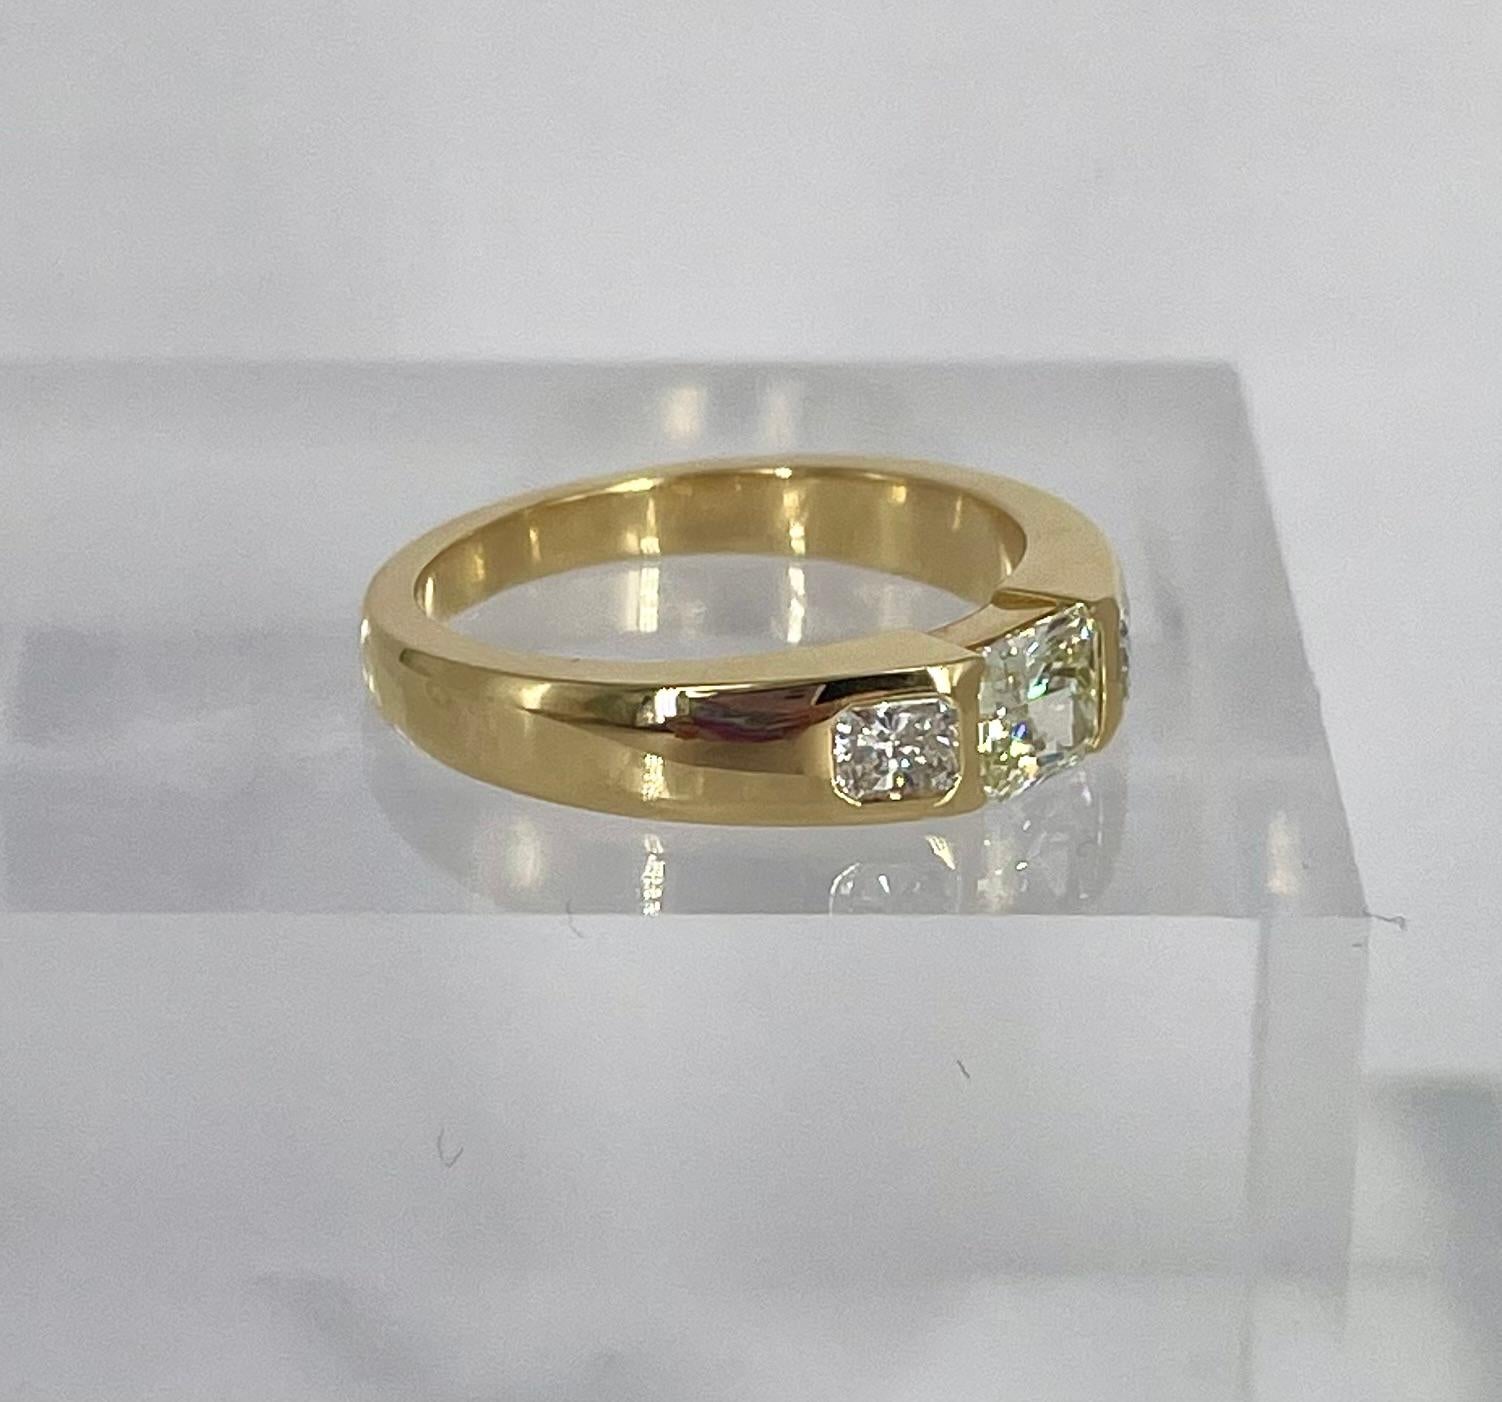 This sleek, bold band is the perfect addition to your stack or makes a statement on its own! This ring features a 0.55 carat fancy light yellow radiant set east-west, following the line of the band. On either side are two white radiant diamonds, F